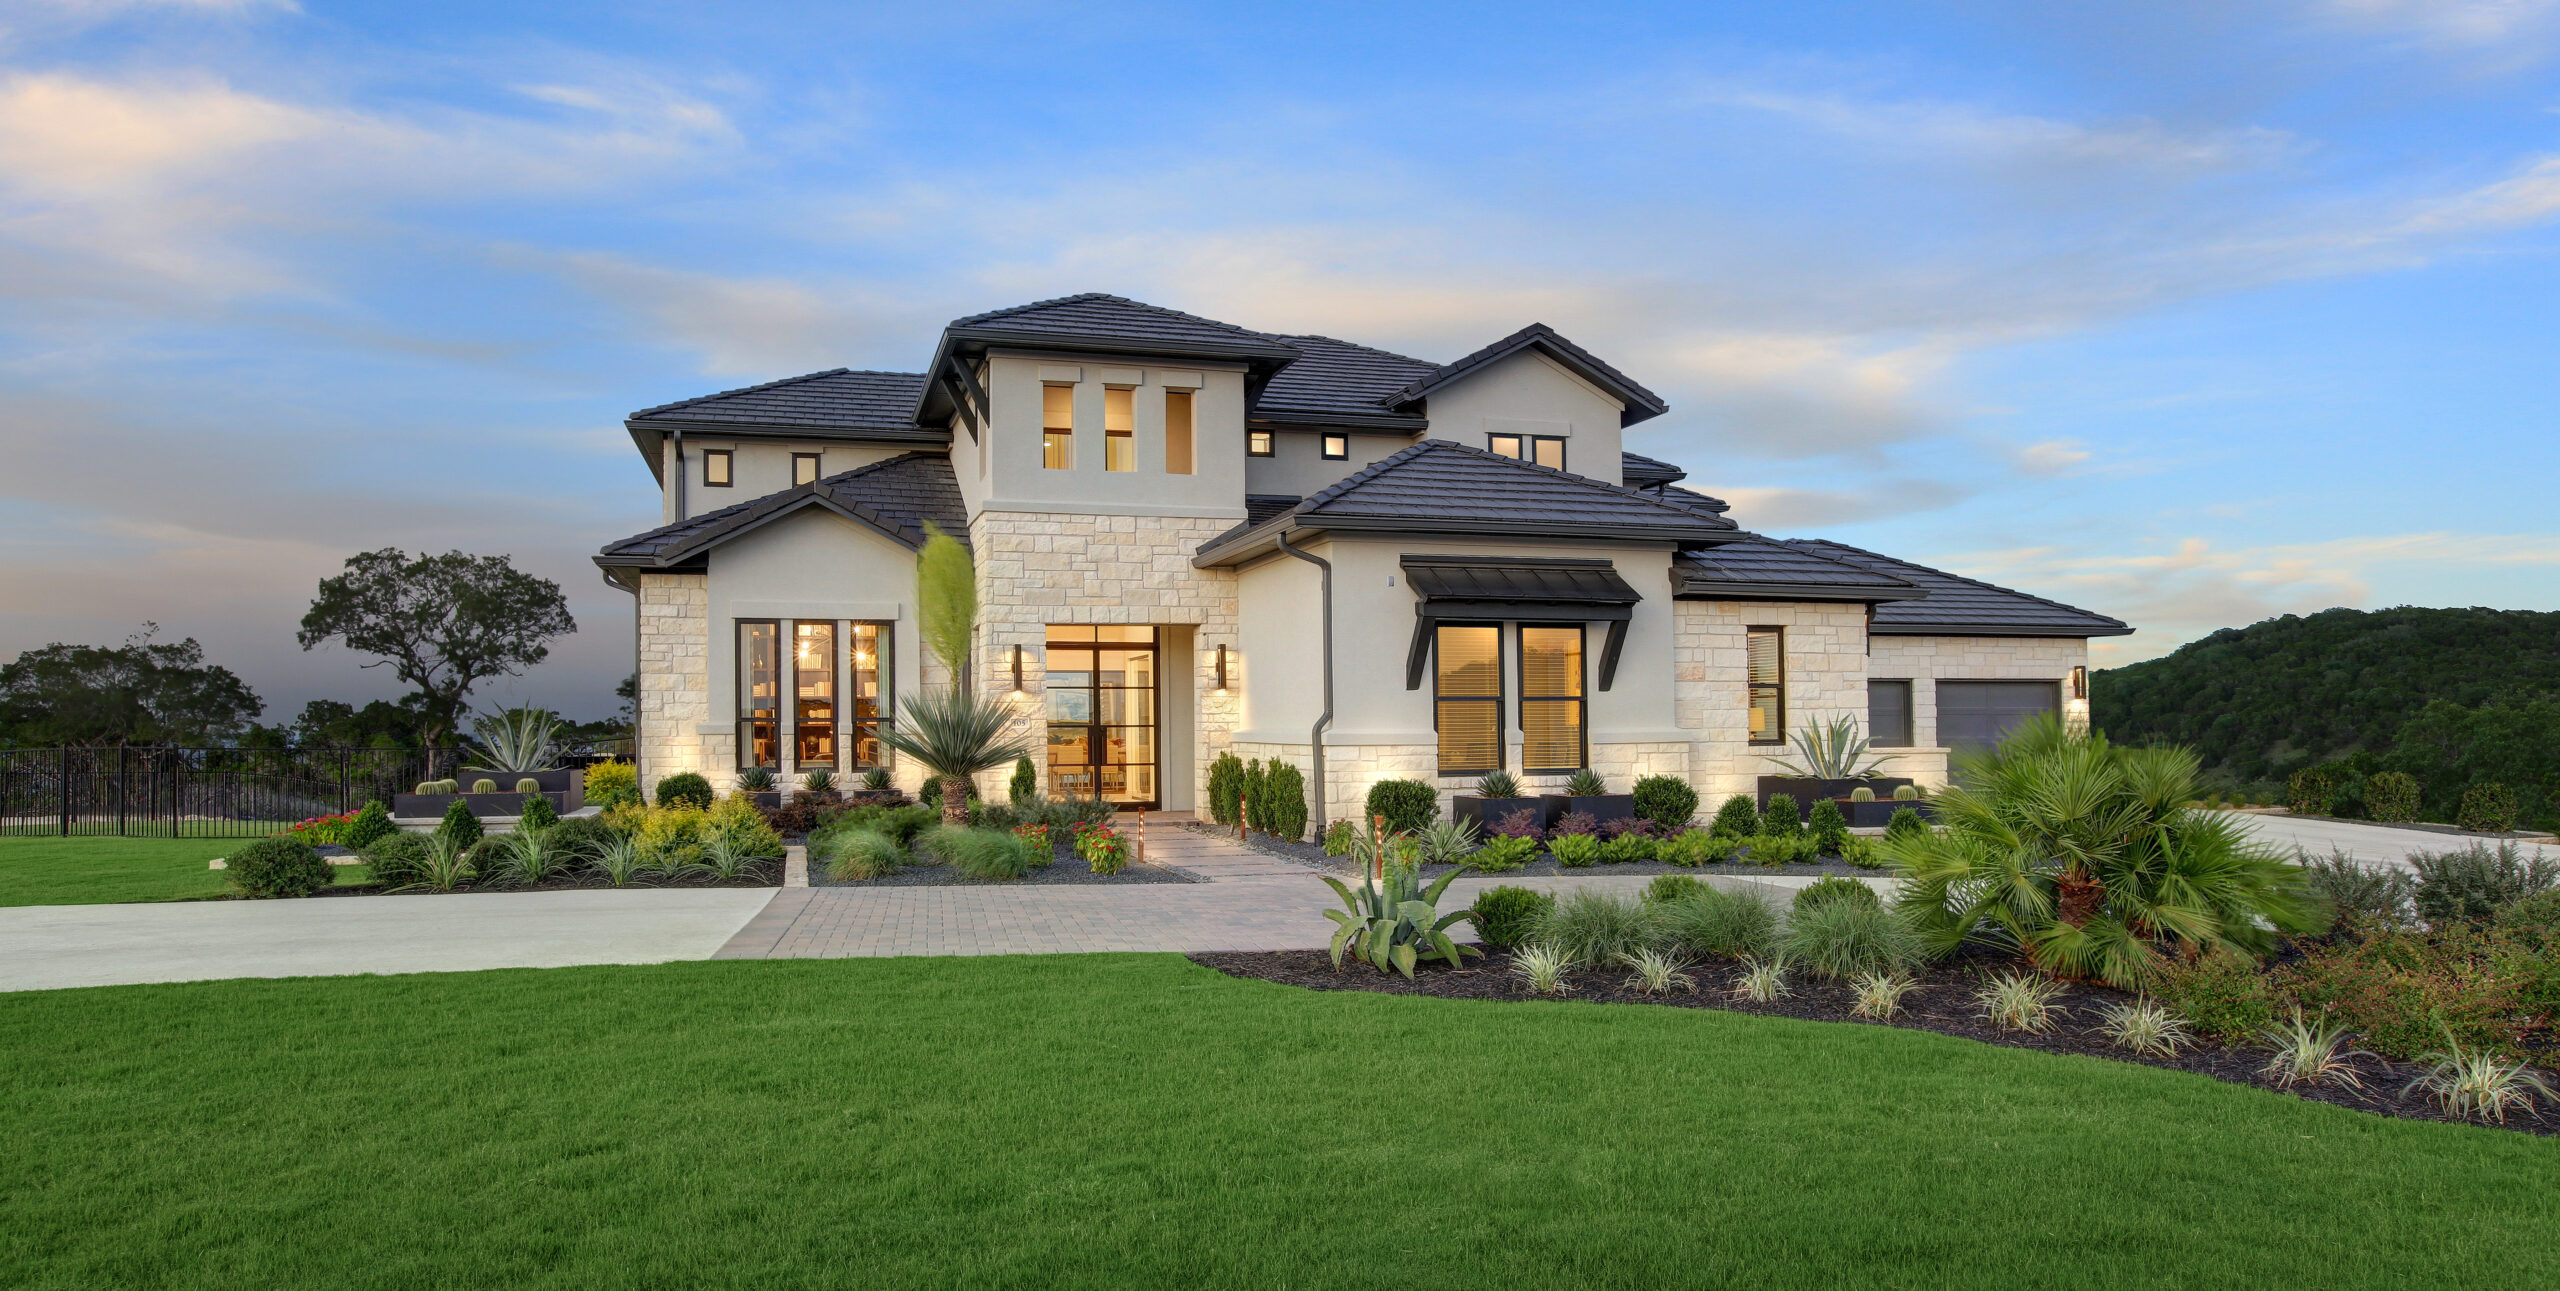 Meridiana Debuts First 100-Foot Homesites in Exclusive, Gated Section